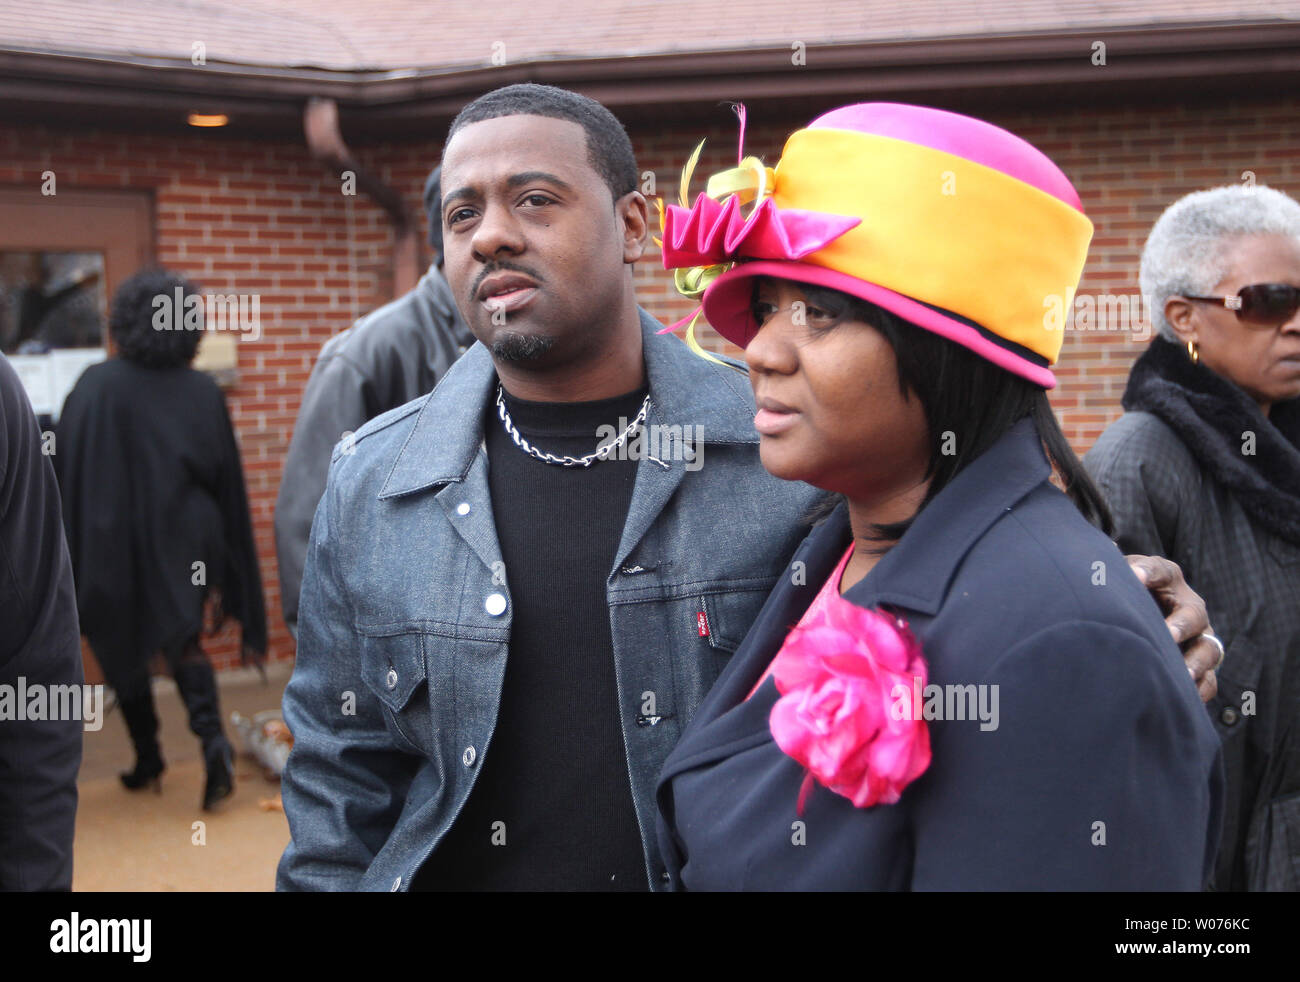 Family members wait outside for the start of the funeral for Jerry Brown, Jr. at the Hopewell Missionary Baptist Church in St. Louis on December 15, 2012. The Dallas CowboysÕ practice squad nose tackle was killed in an Irving car accident on December 8, 2012 when his best friend and teammate Josh Brent hit a curb, flipping the vehicle.    UPI/Bill Greenblatt Stock Photo